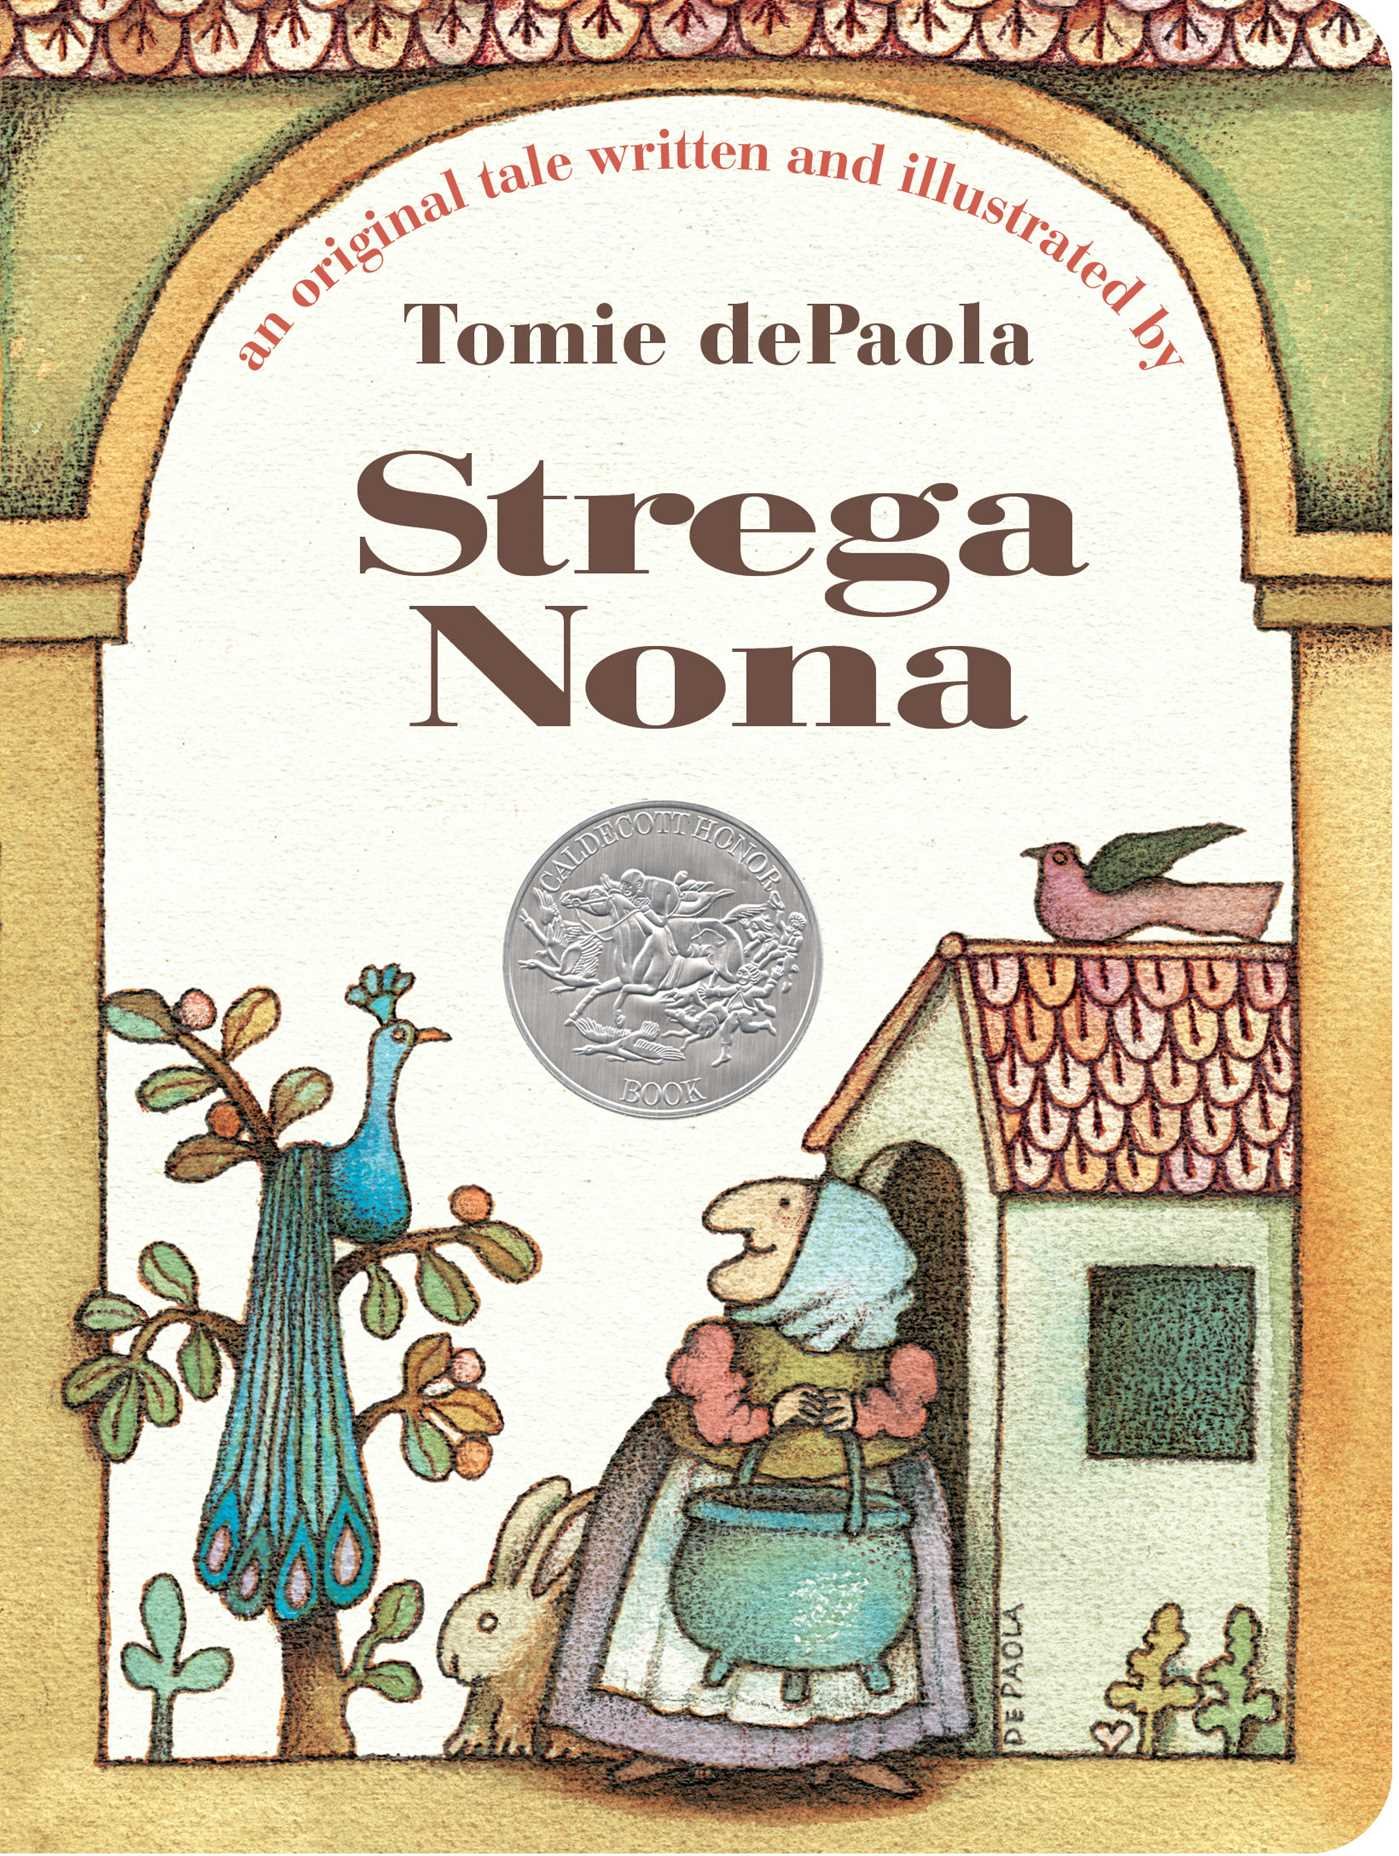 Book cover for "Strega Nona" depicting an elderly woman holding a cauldron smiling up at a peacock on a tree branch